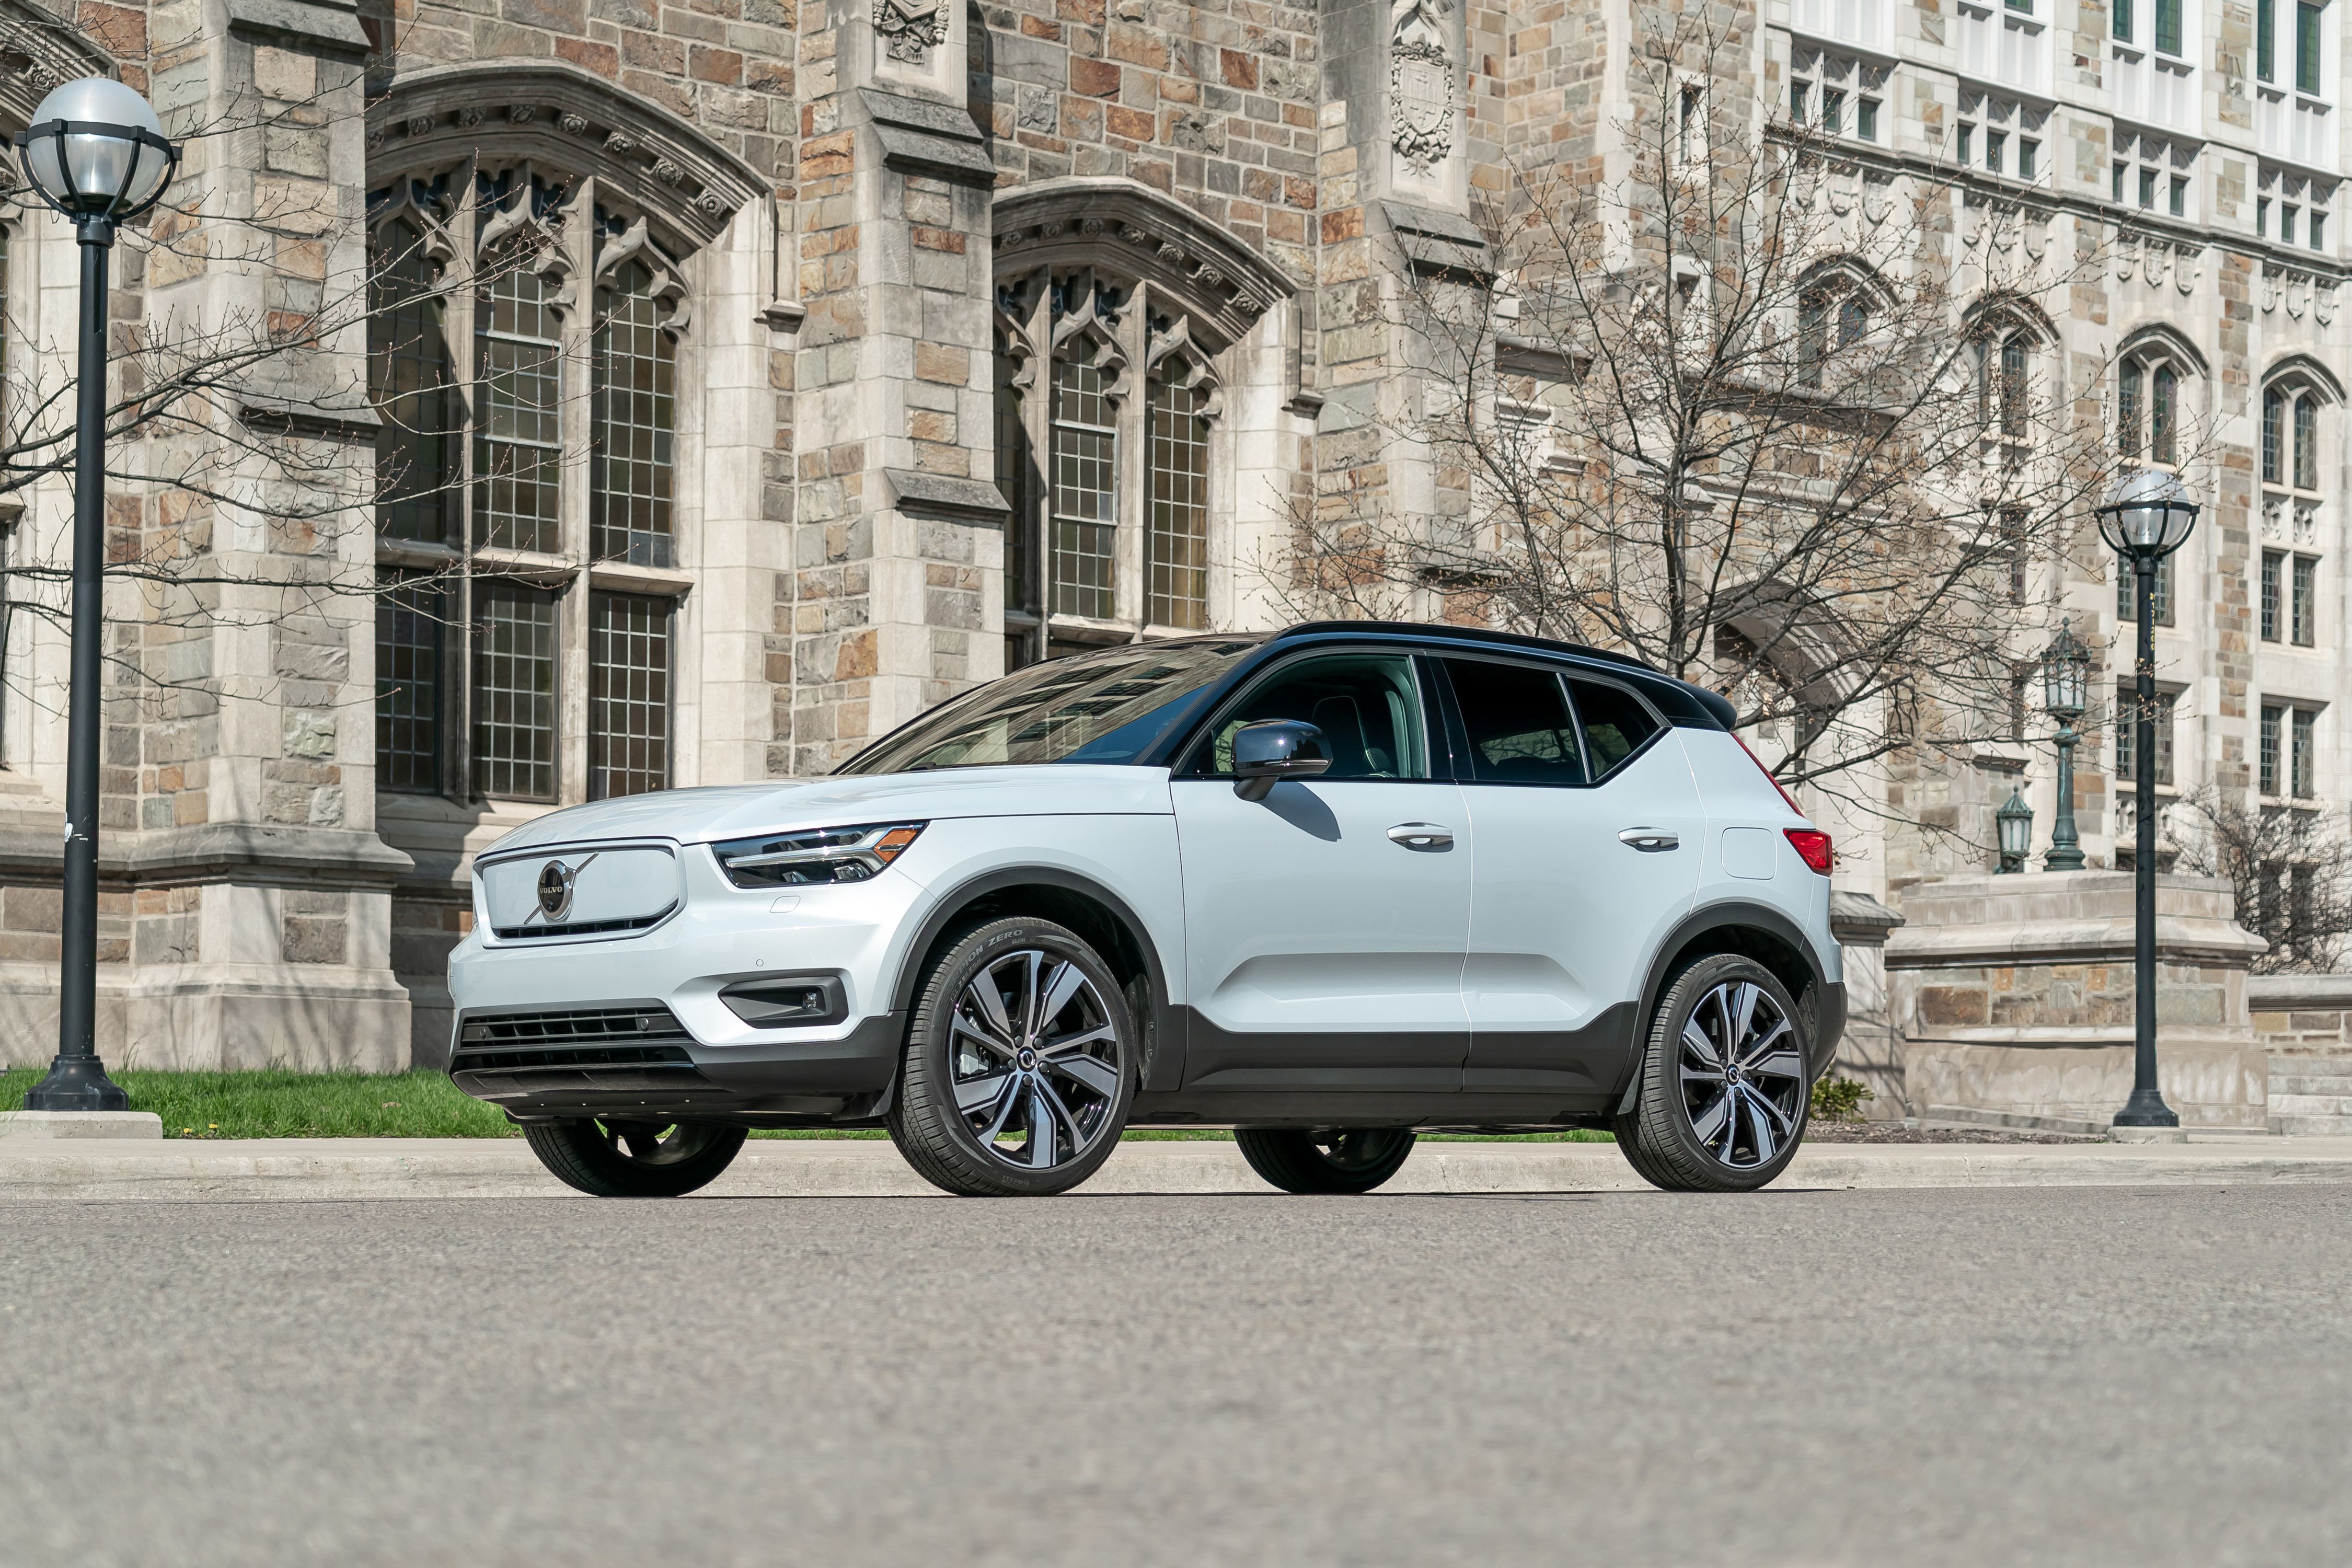 bladerdeeg Behoren Rauw 2021 Volvo XC40 Recharge Review, Pricing, and Specs